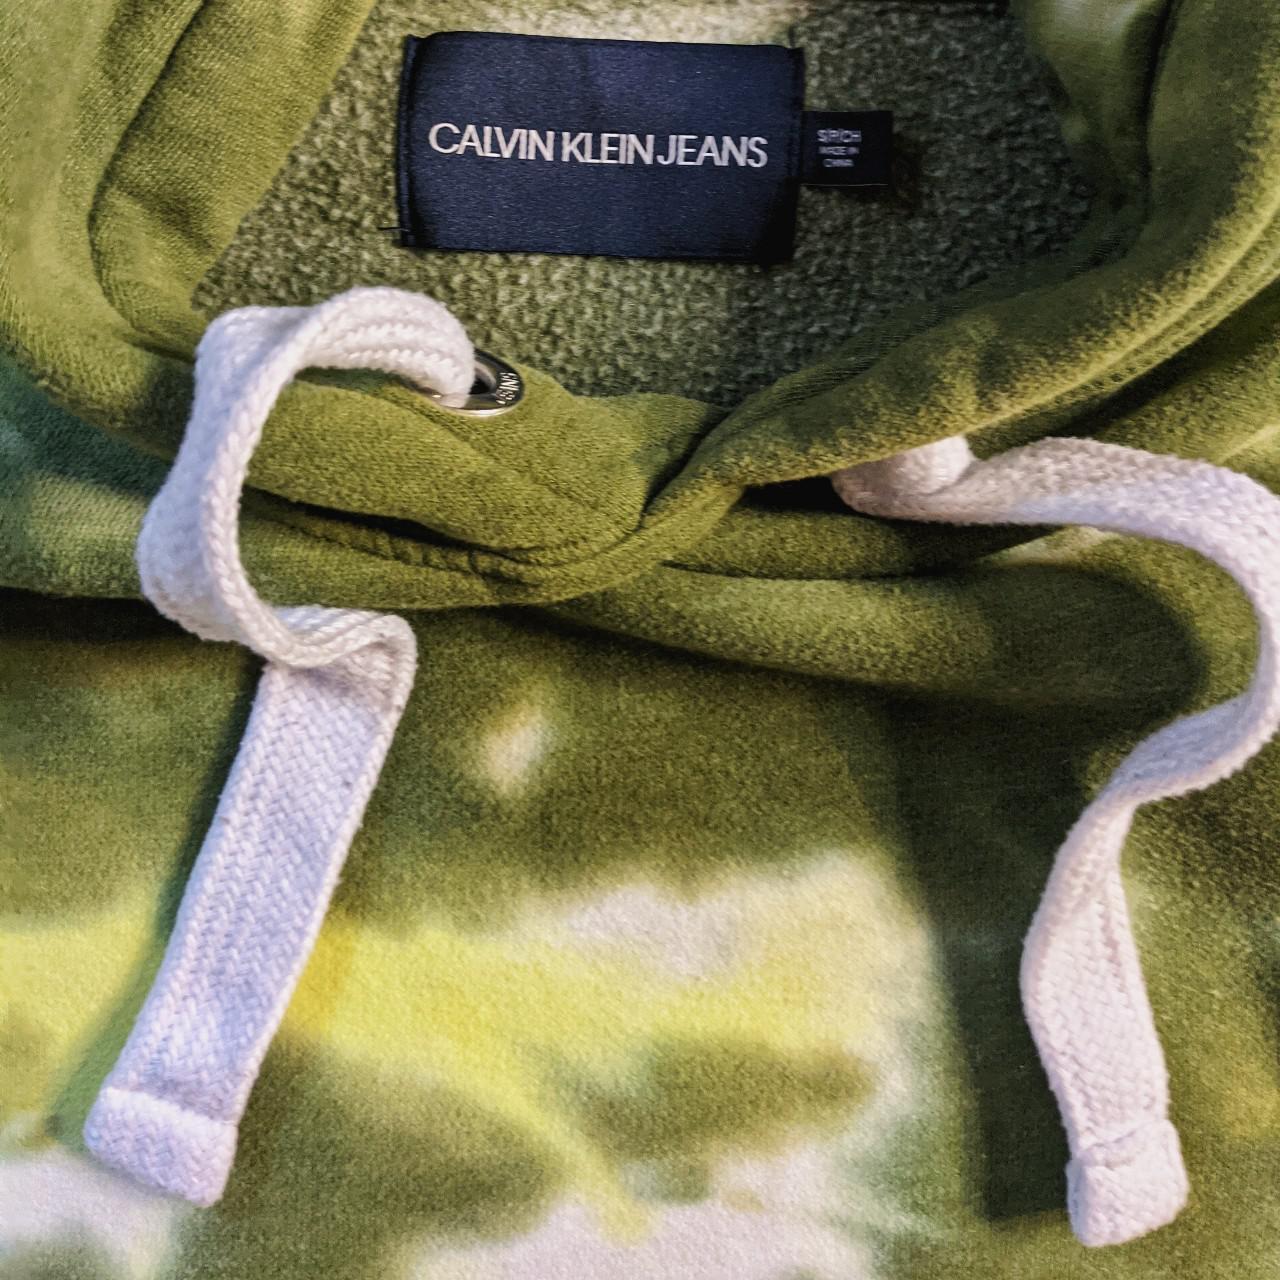 Product Image 3 - Tie dye cropped Calvin Klein